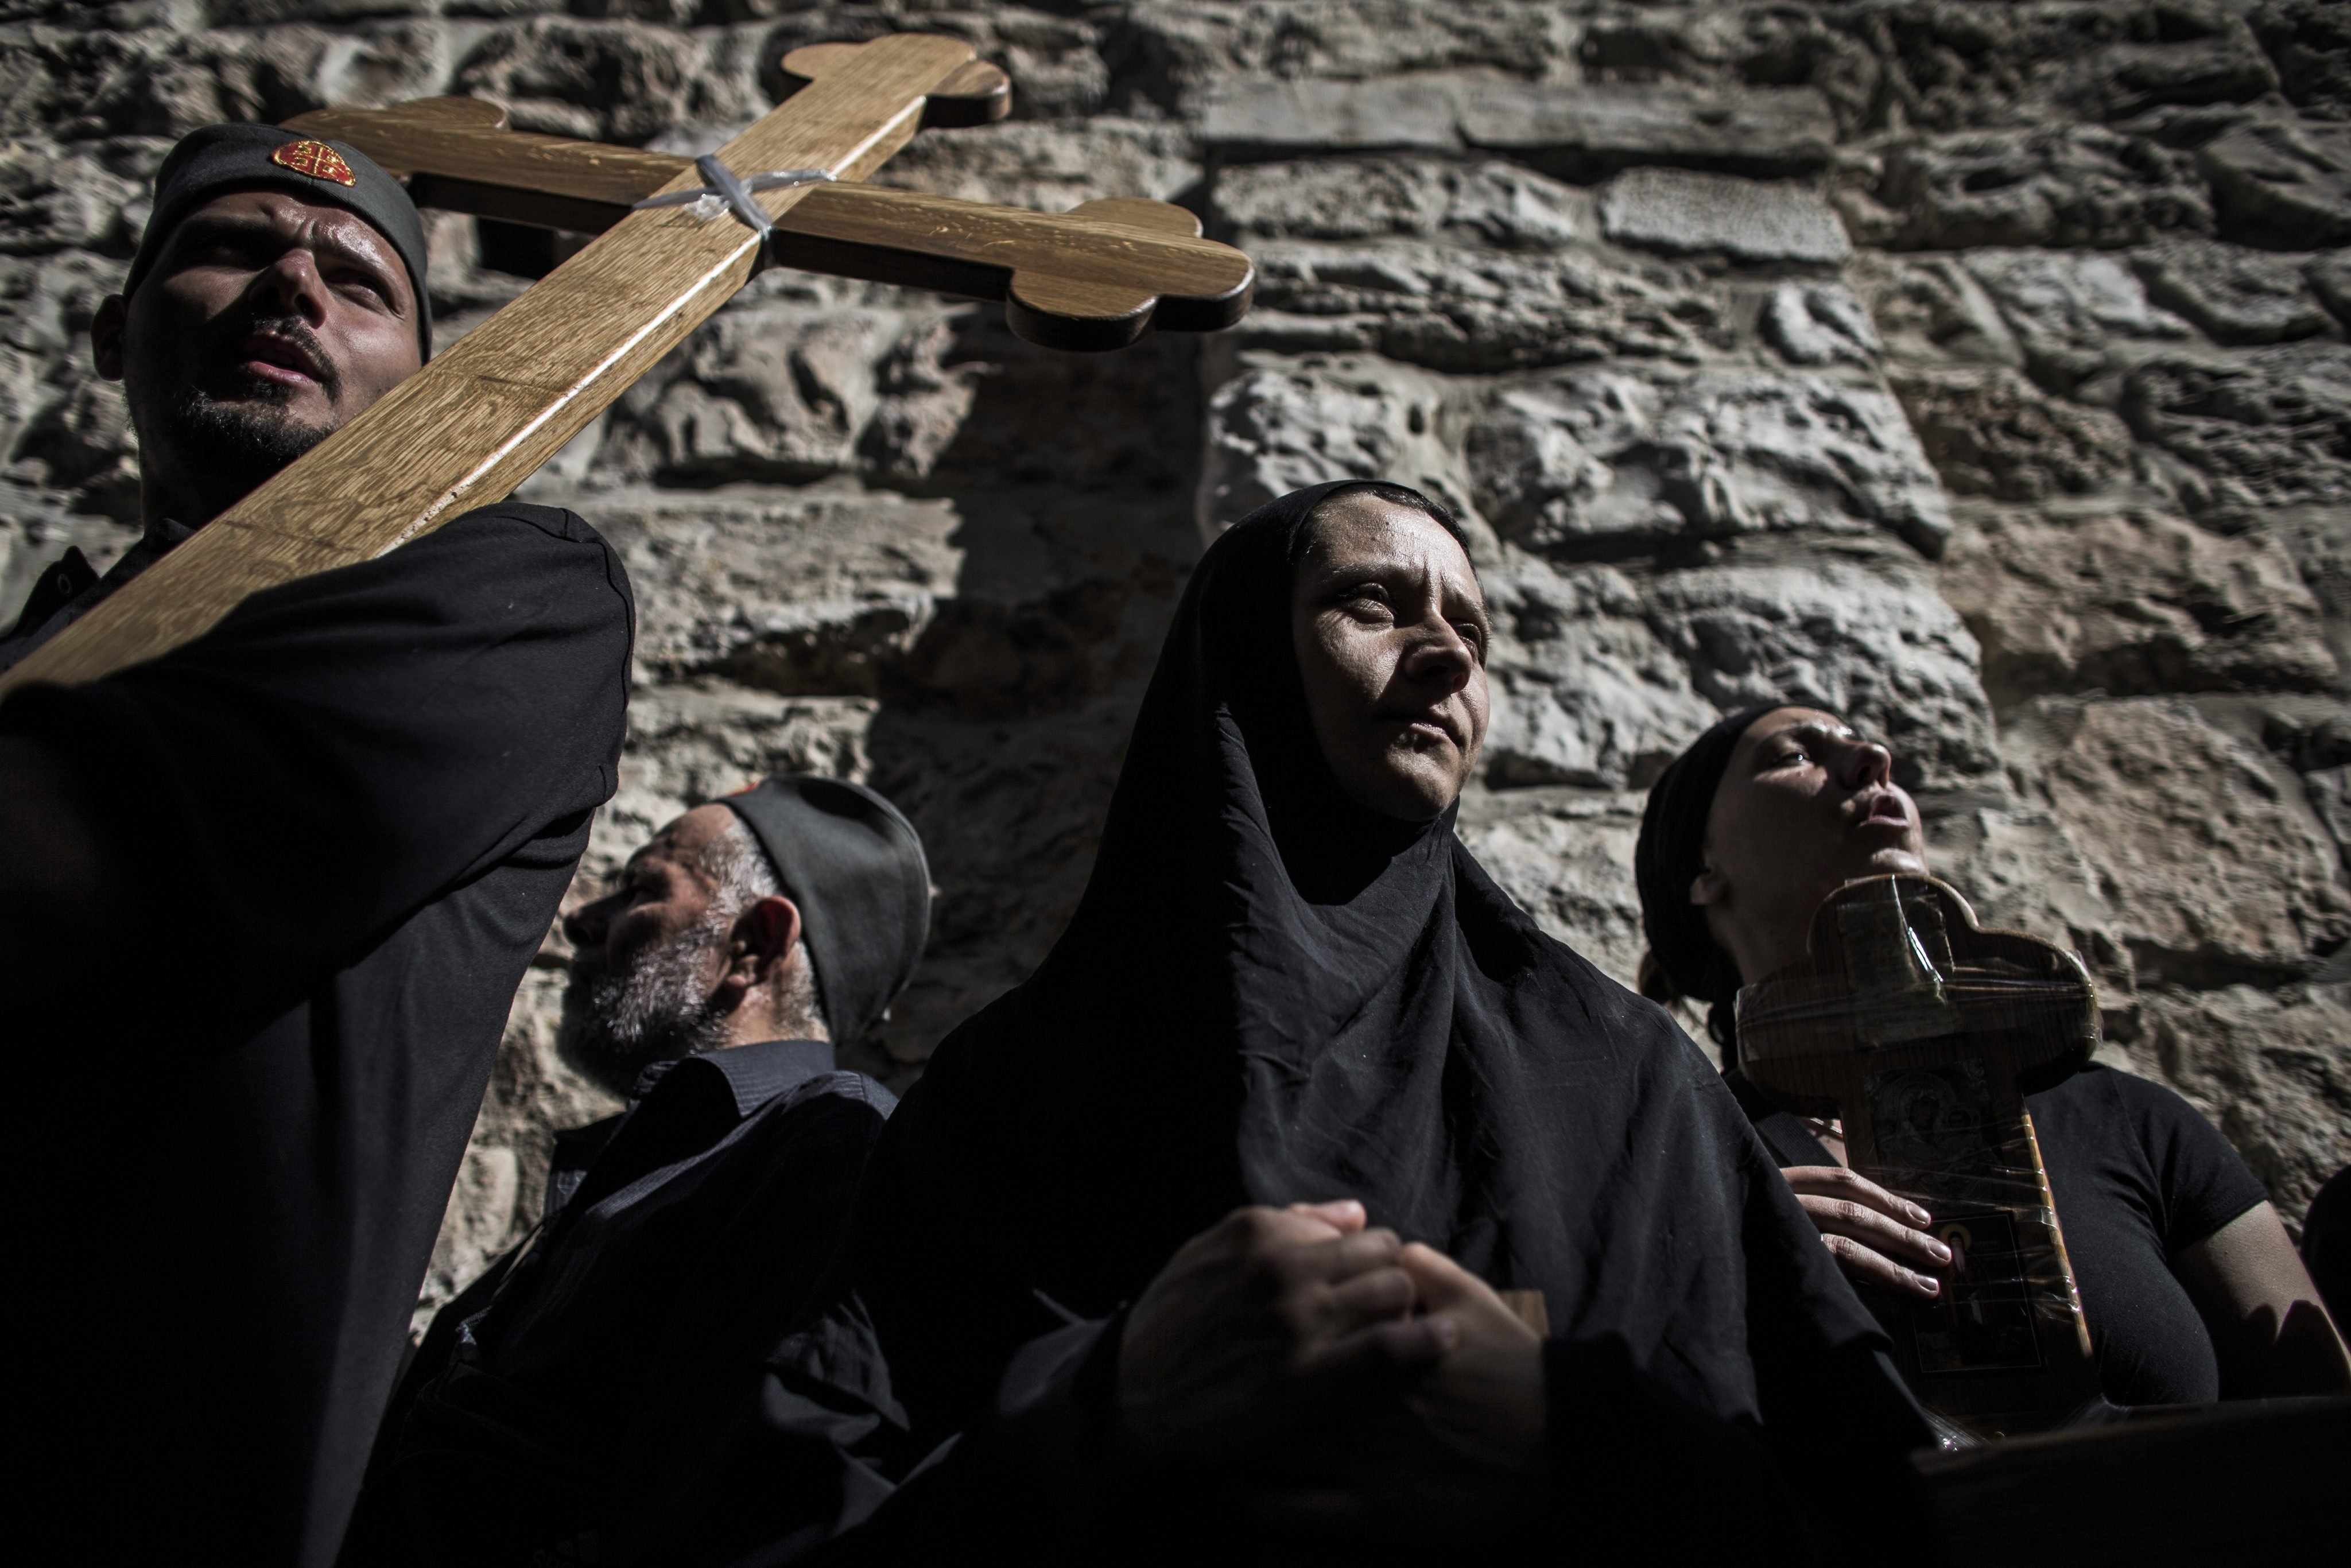 Apr. 18, 2014. Christian worshipers carry crosses during a Good Friday procession on the Via Dolorosa, retracing the route Jesus Christ walked to his crucifixion in Jerusalem. Thousands of pilgrims, tourists and clergy took part in the celebrations.